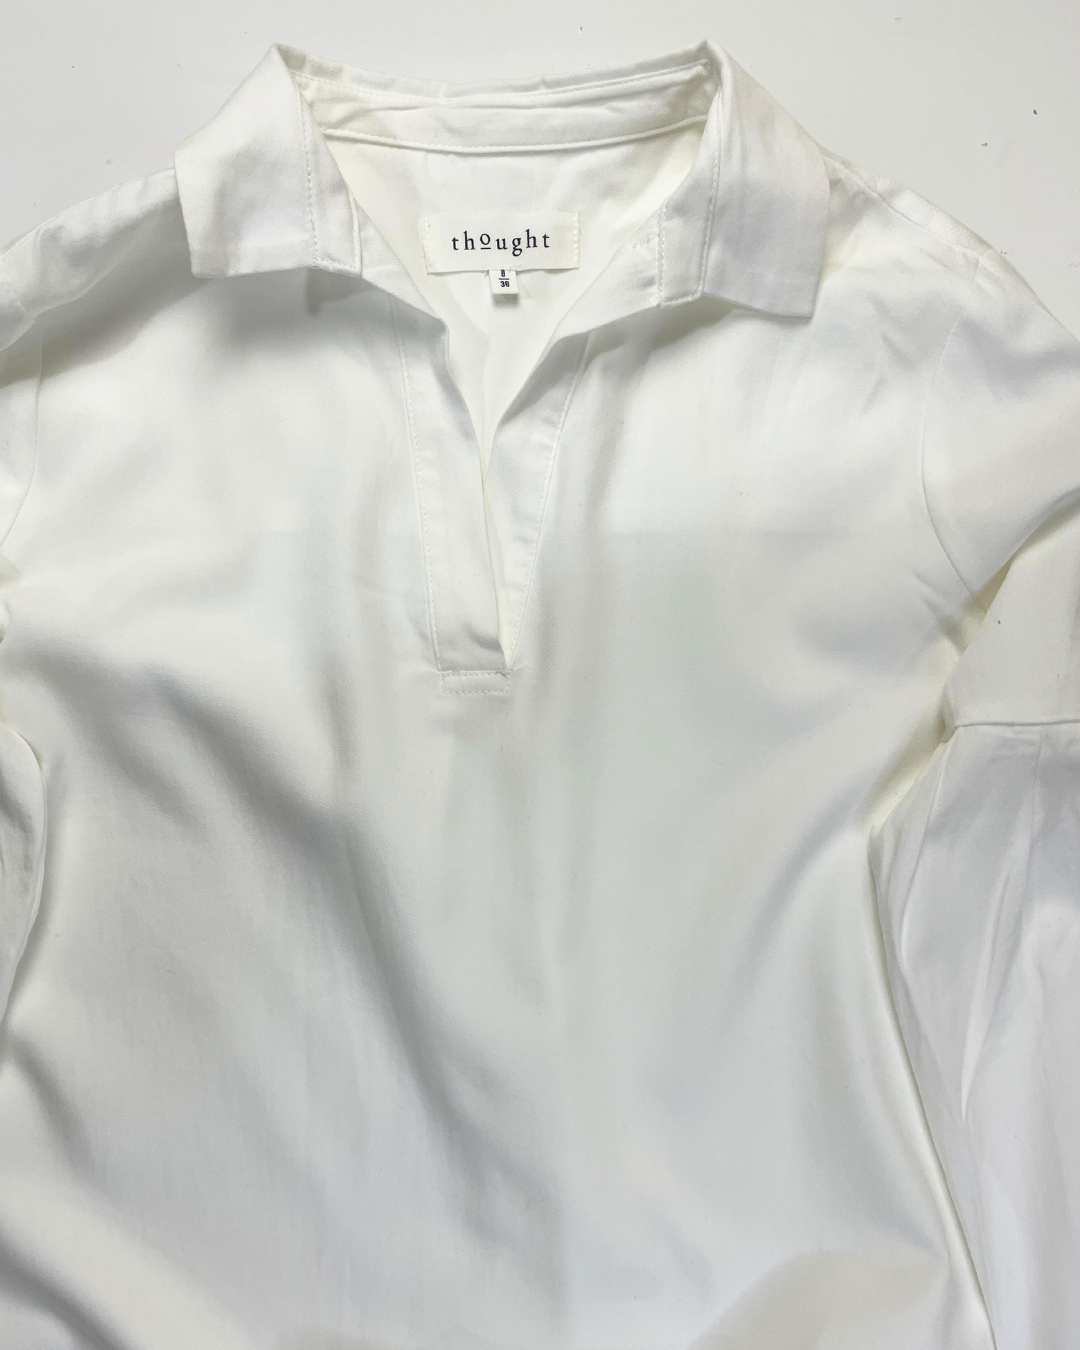 second hand Thought White V-neck Shrt in Size XS 10 OWNI